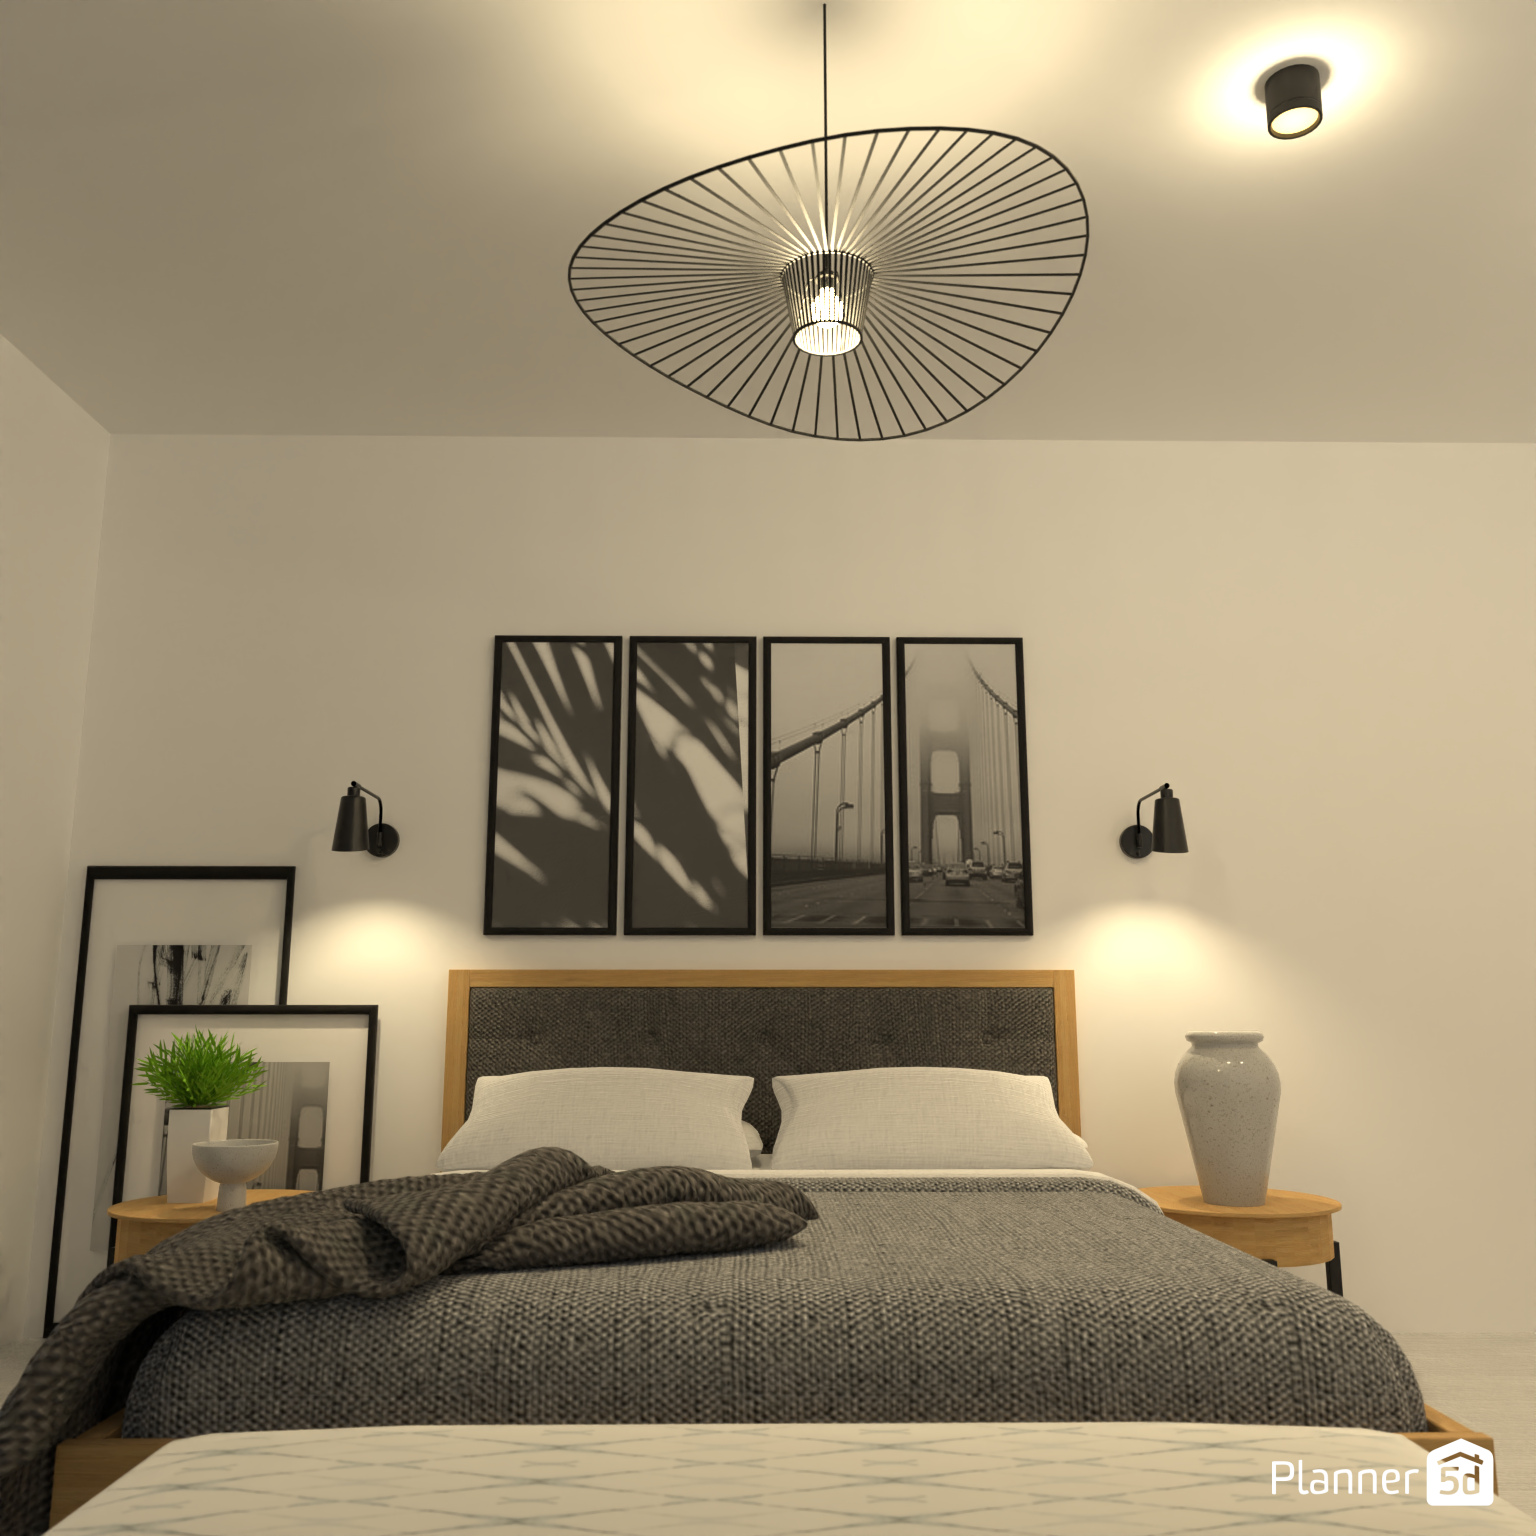 Suburb modern bedroom 16267763 by Anne image